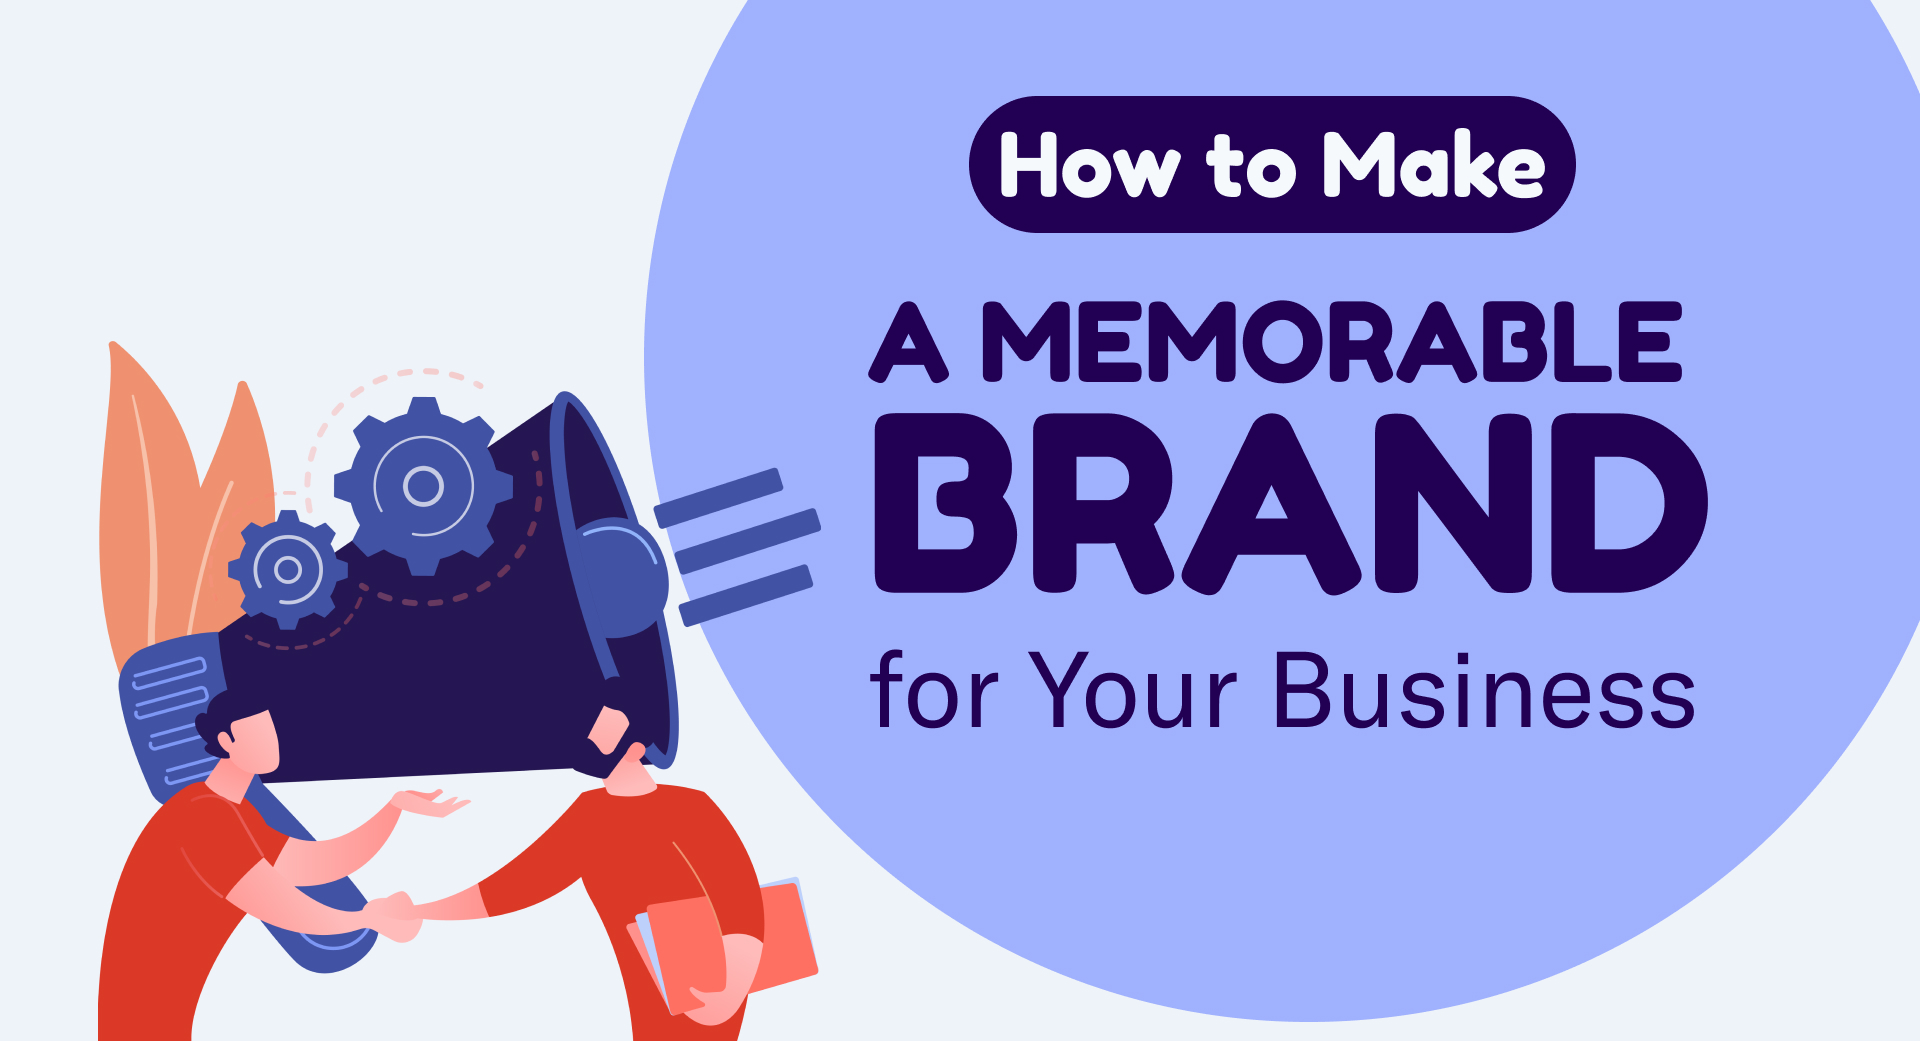 How-to-Make-a-Memorable-Brand-for-Your-Business